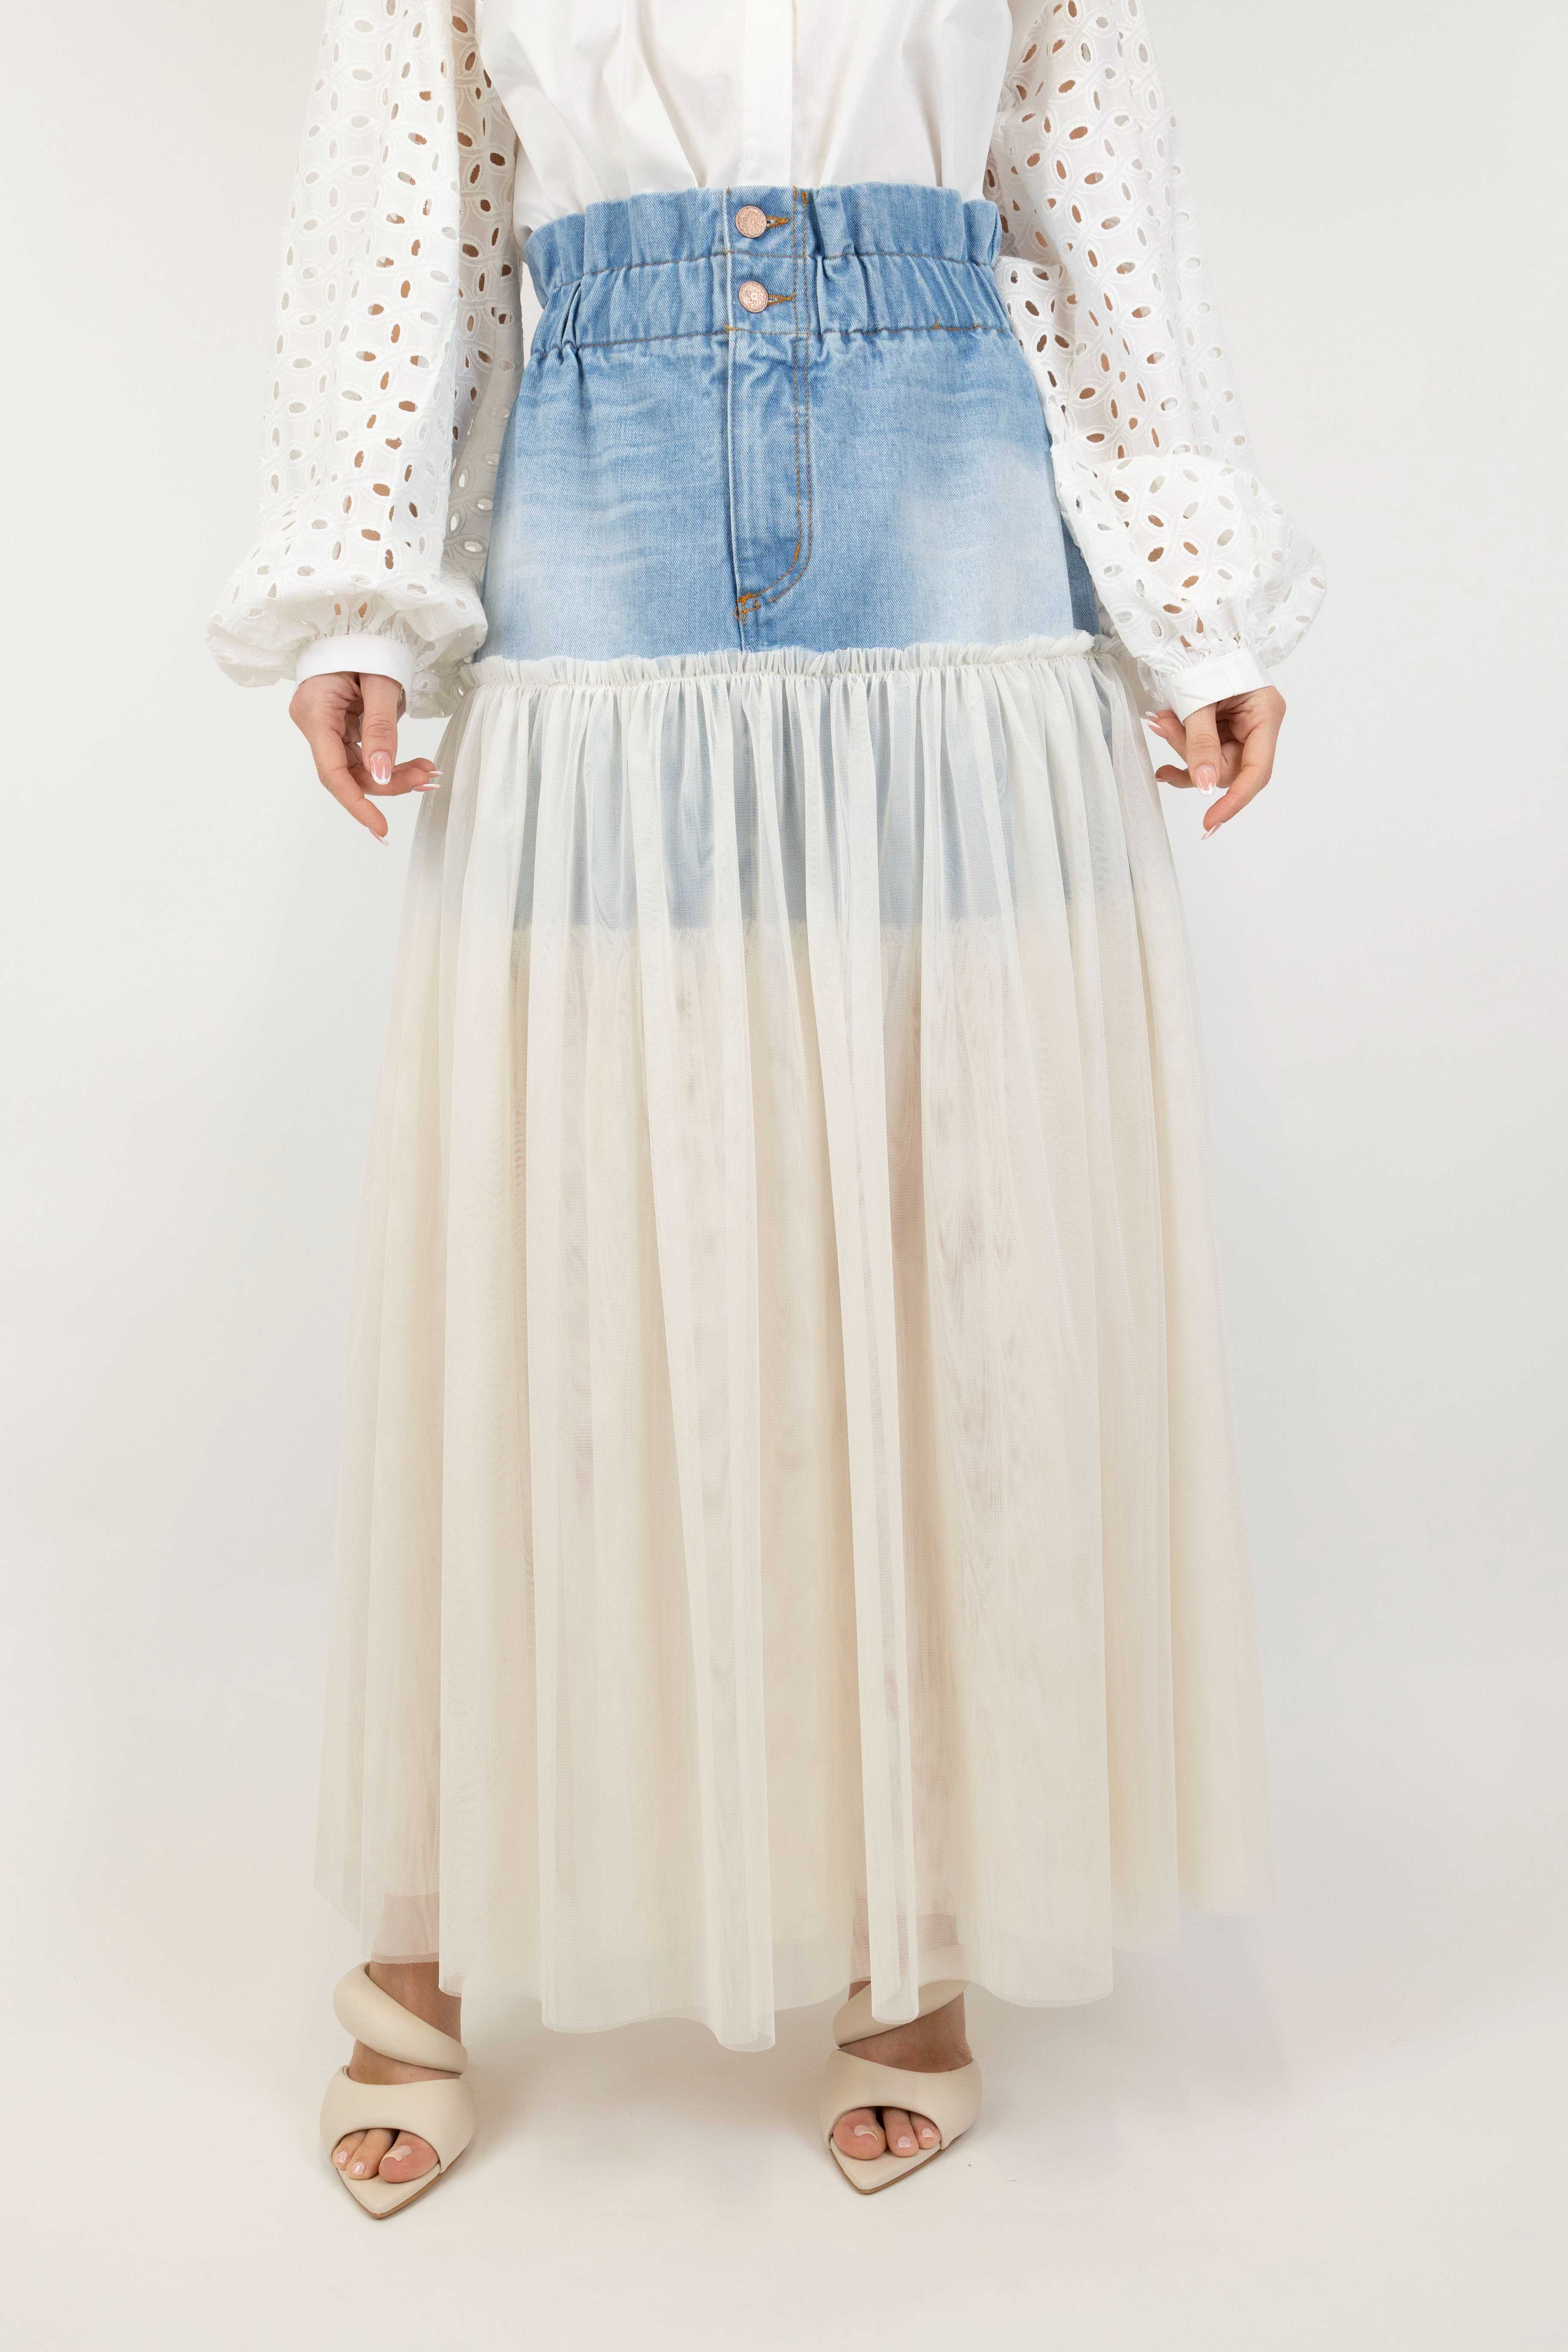 Tension in - High-waisted skirt in denim and tulle